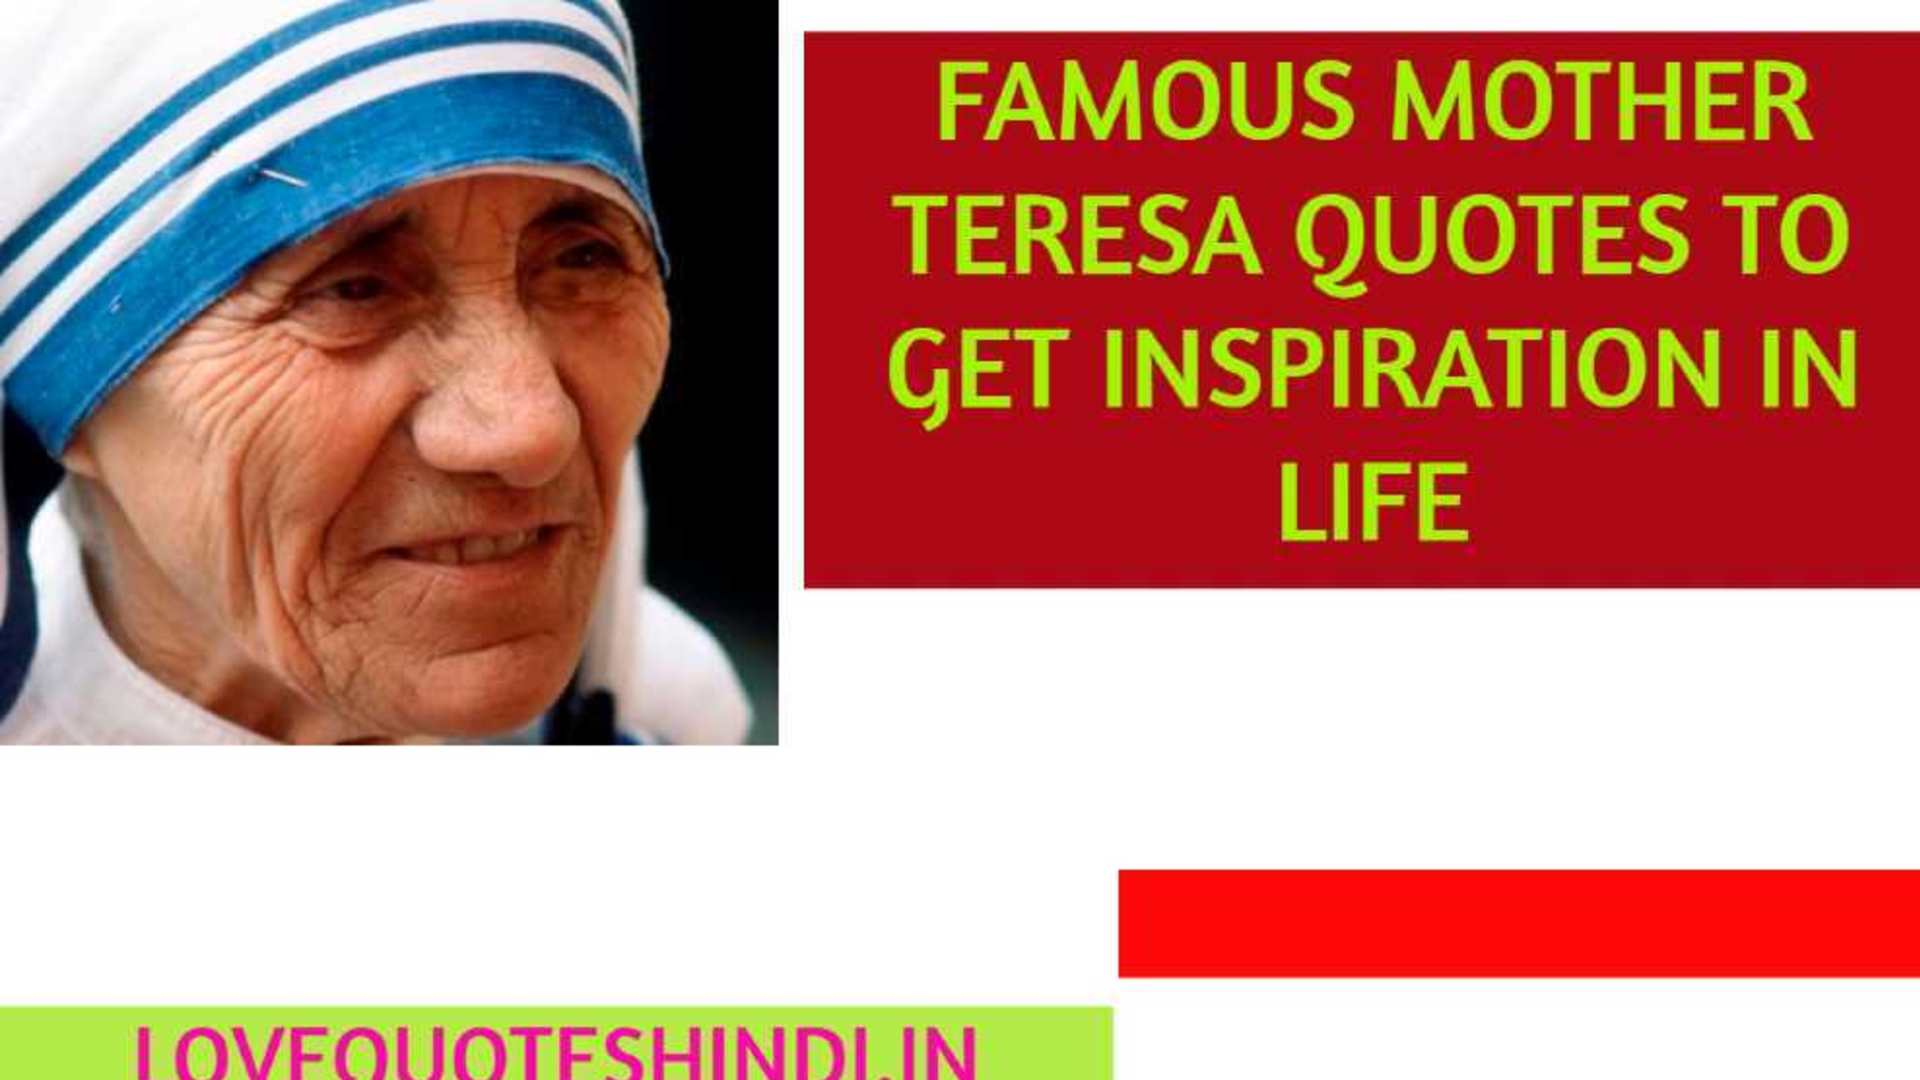 101 Famous Mother Teresa Quotes on Love, Kindness and Life. HD Image